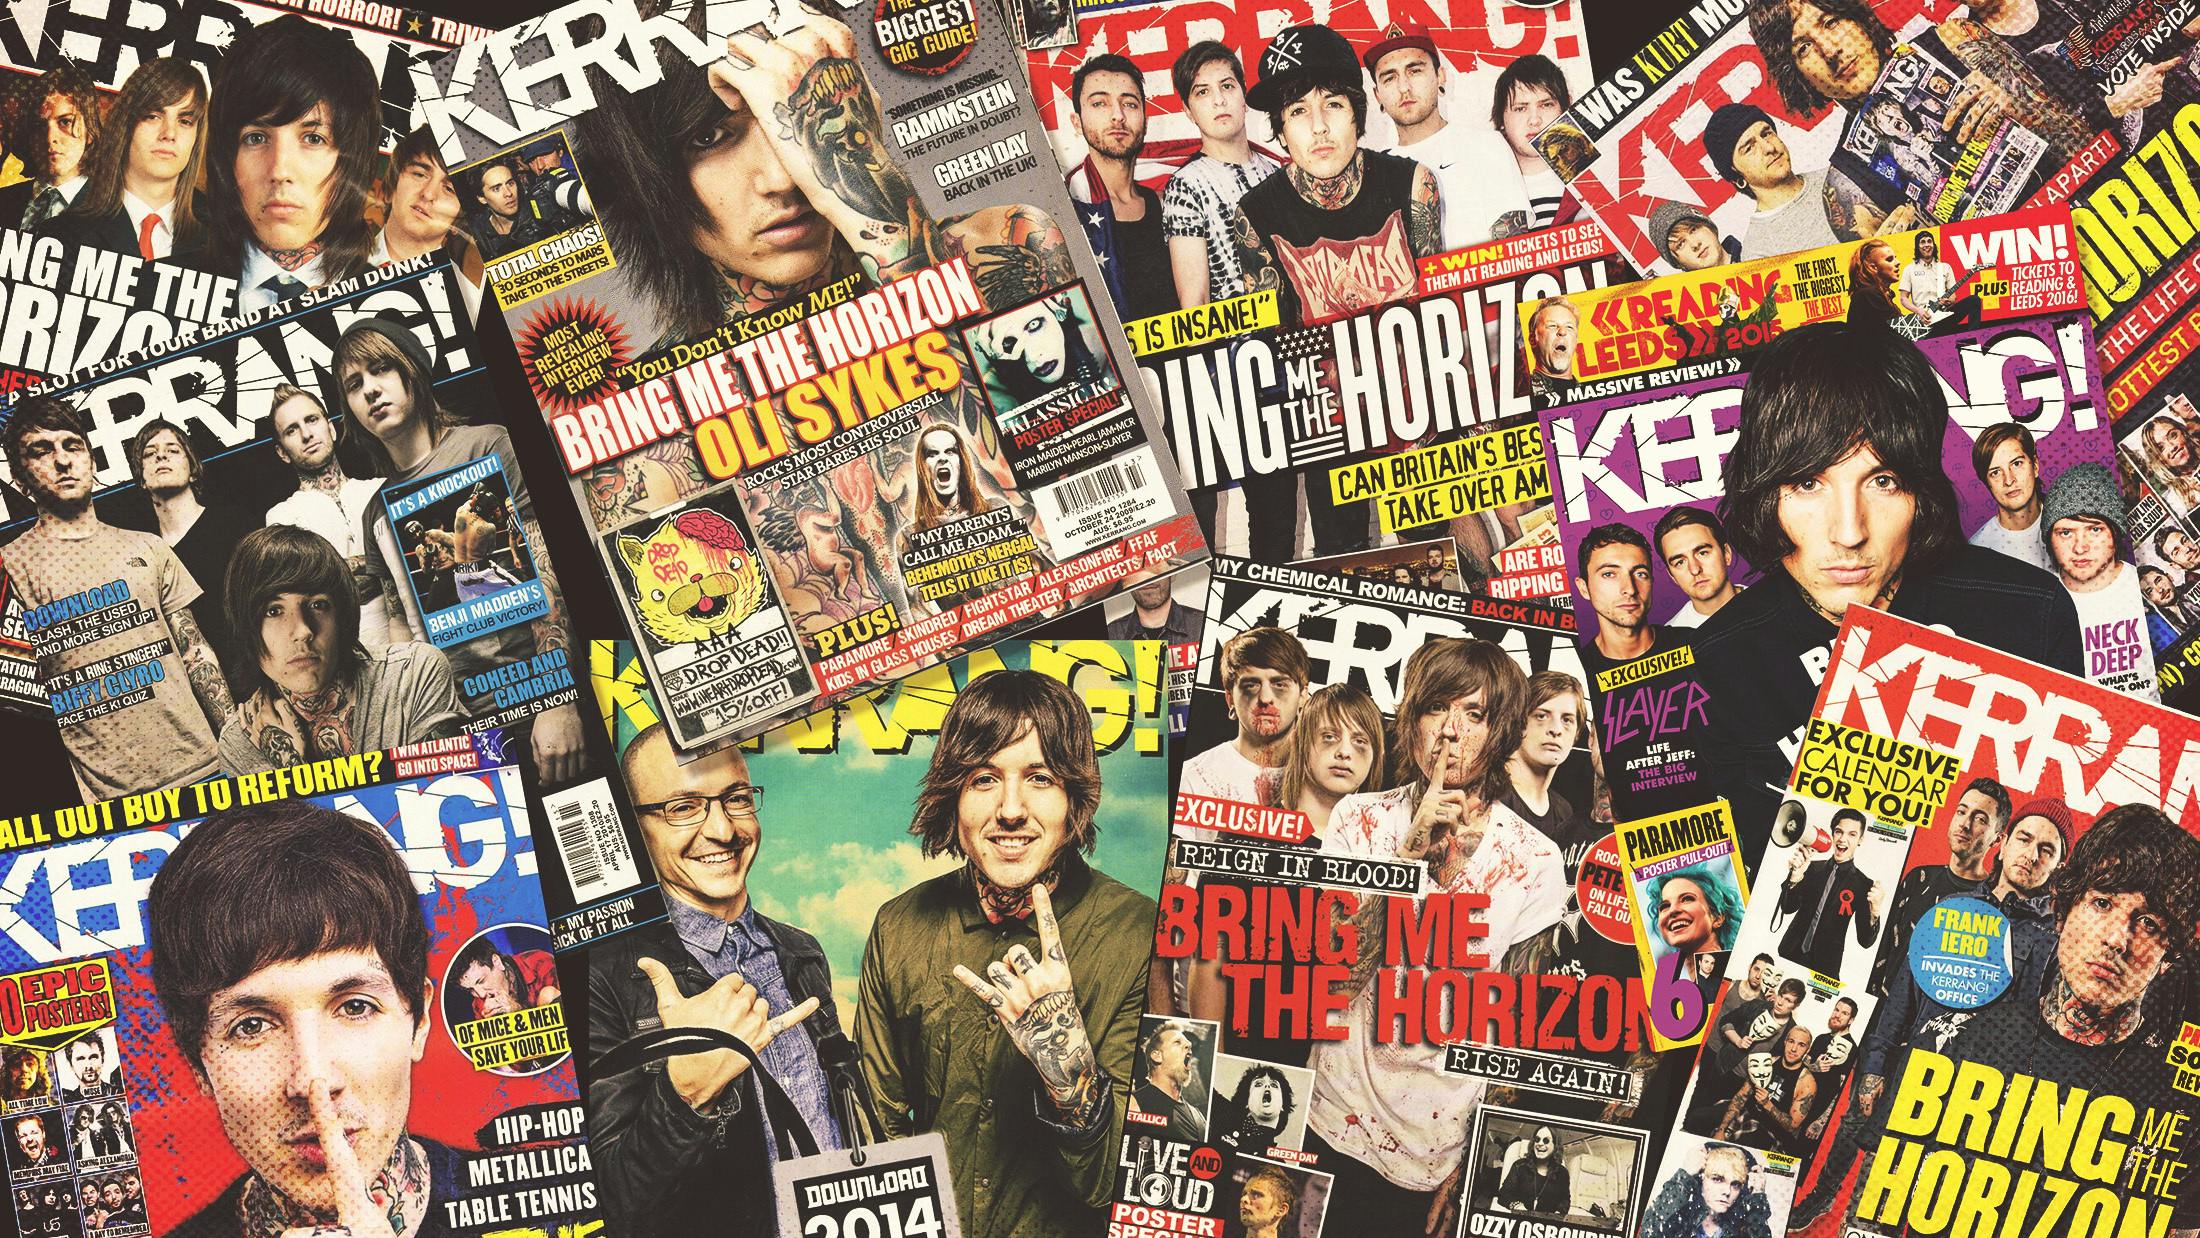 Gallery: Bring Me The Horizon Through The Ages And Pages Of Kerrang!